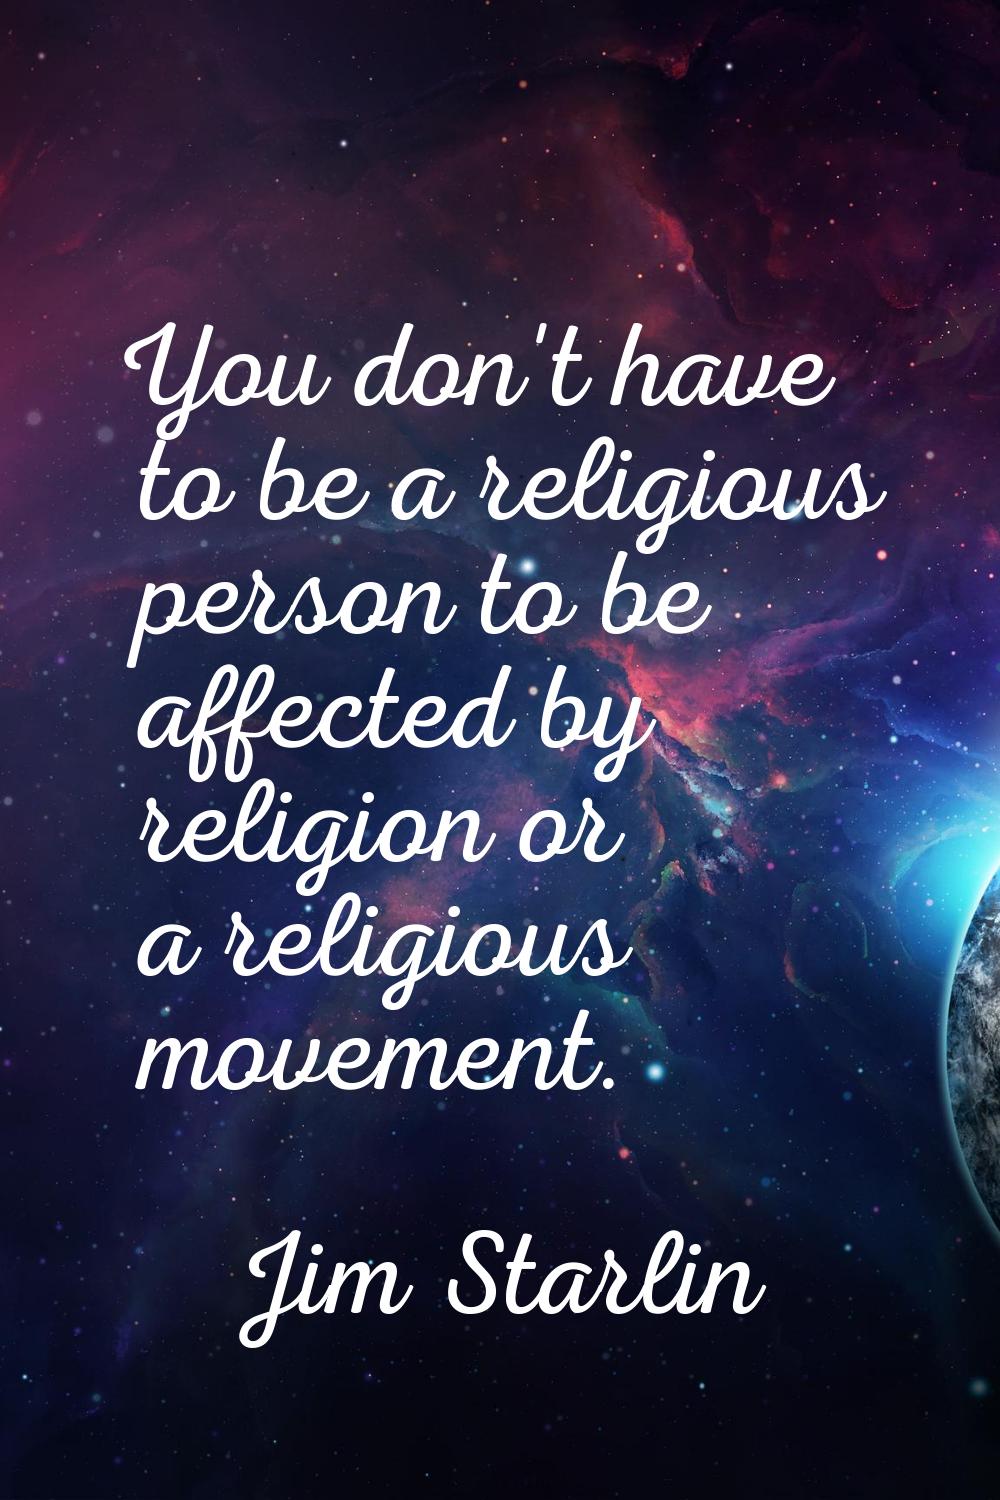 You don't have to be a religious person to be affected by religion or a religious movement.